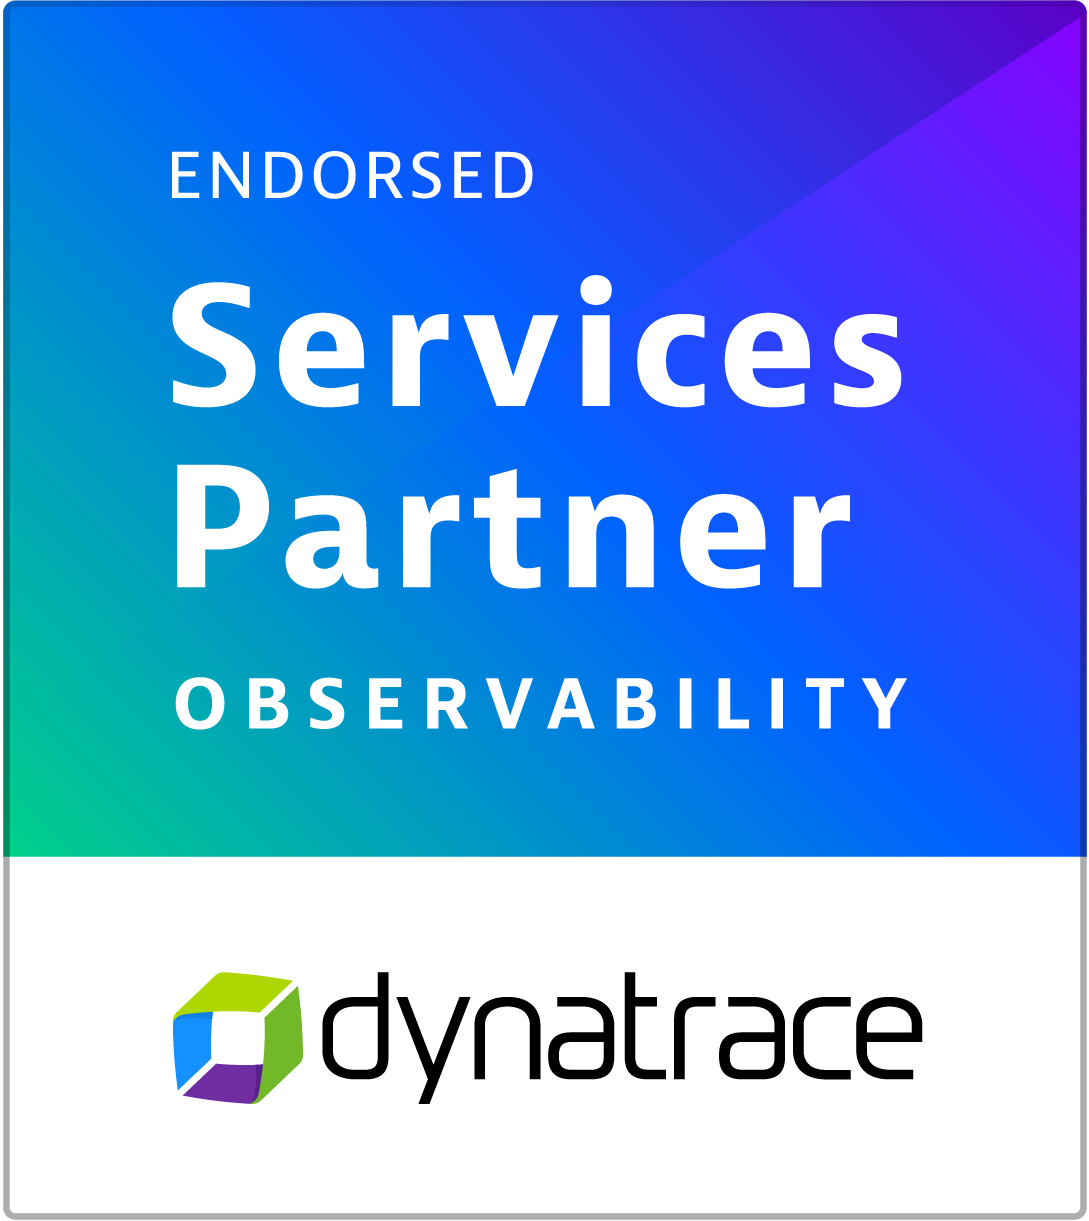 Eviden is an endorsed service Partner from Dynatrace